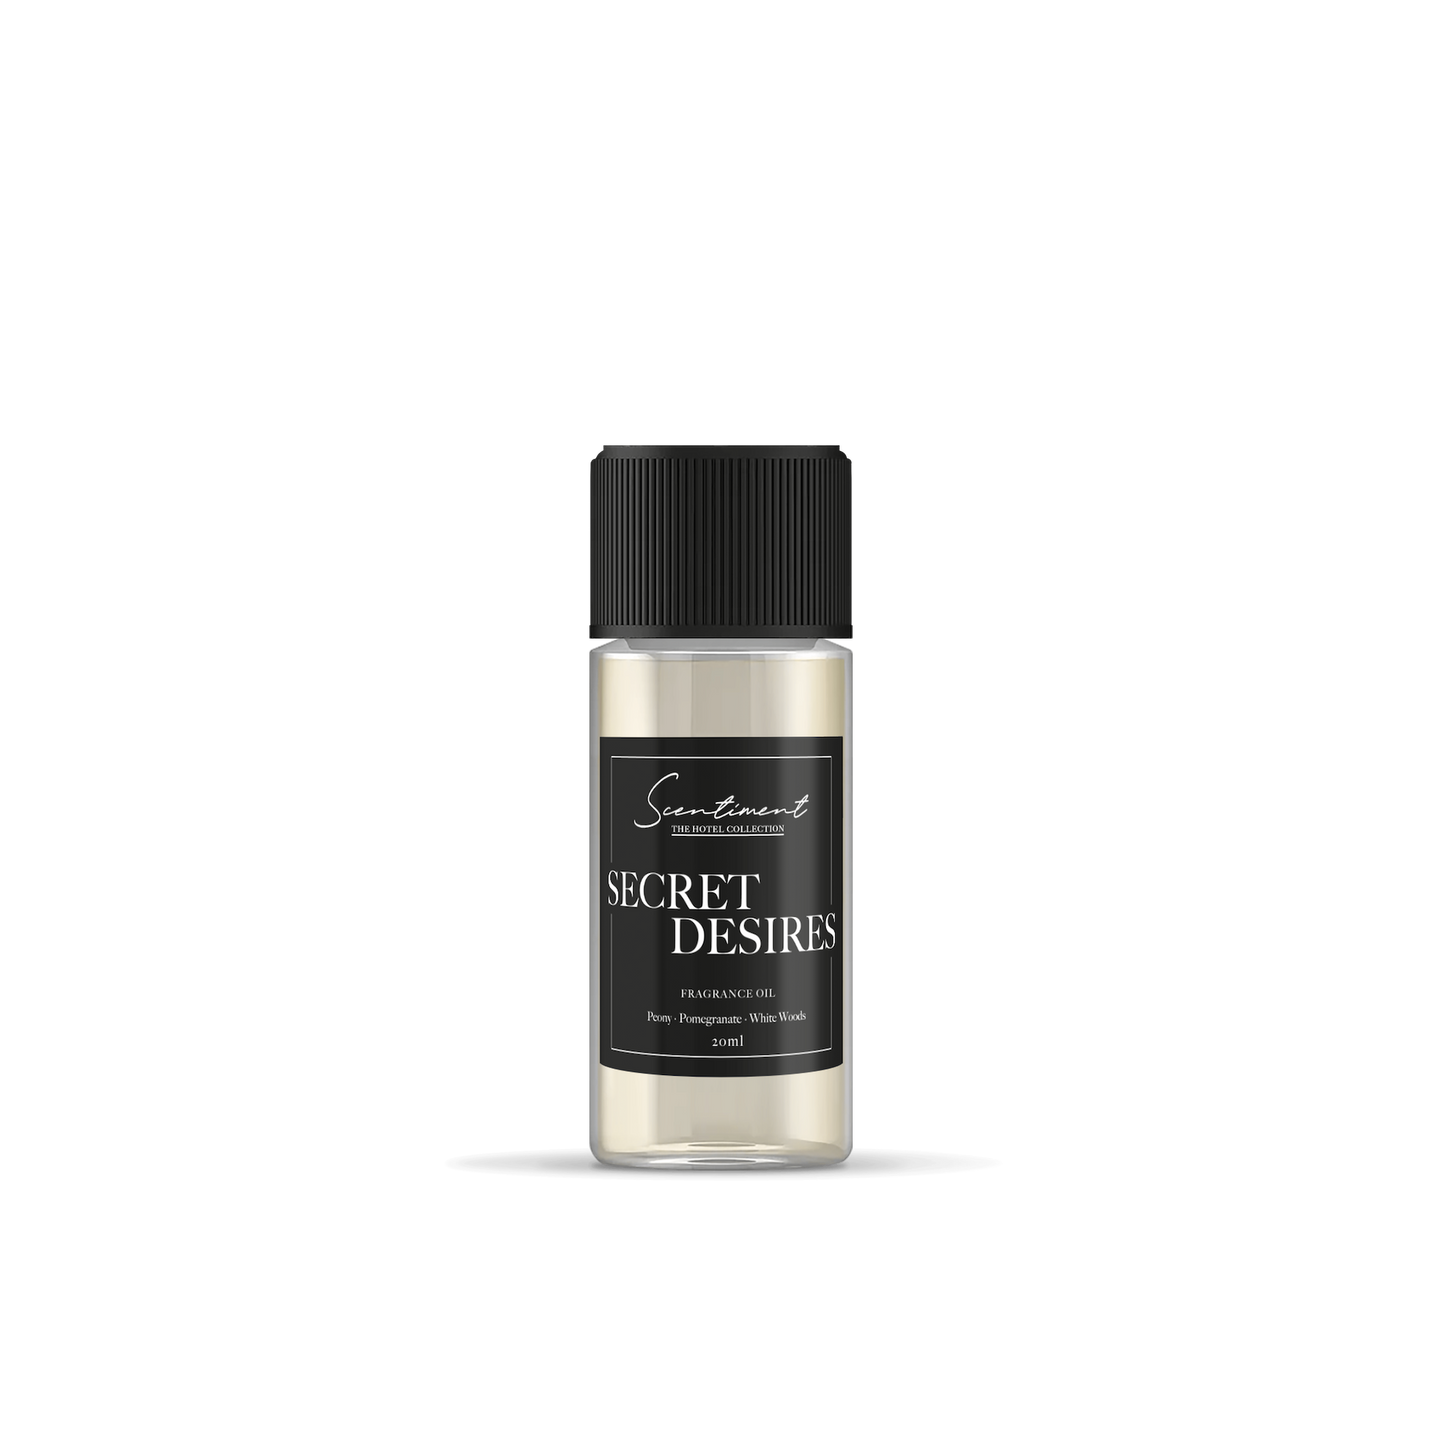 Secret Desires Fragrance Oil, inspired by ARIA® LAs Vegas, with notes of Peony, Pomegranate, and White Woods.